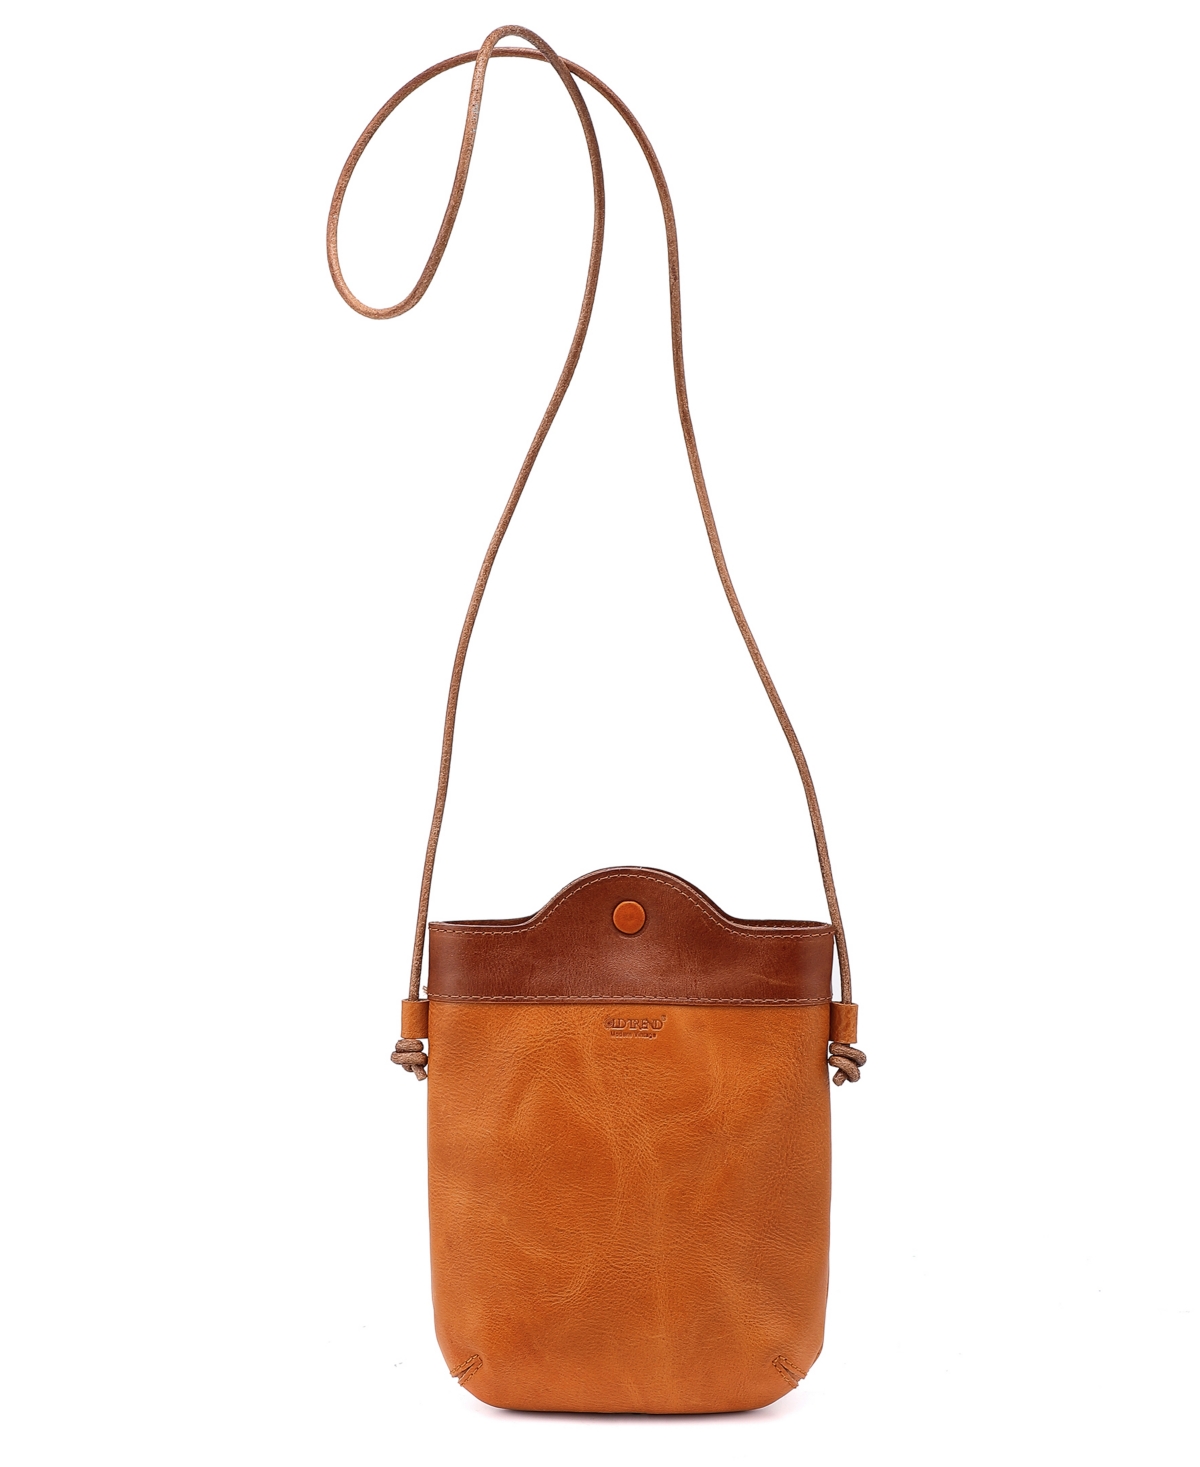 Old Trend Women's Genuine Leather Out West Crossbody Bag In Camel,chestnut